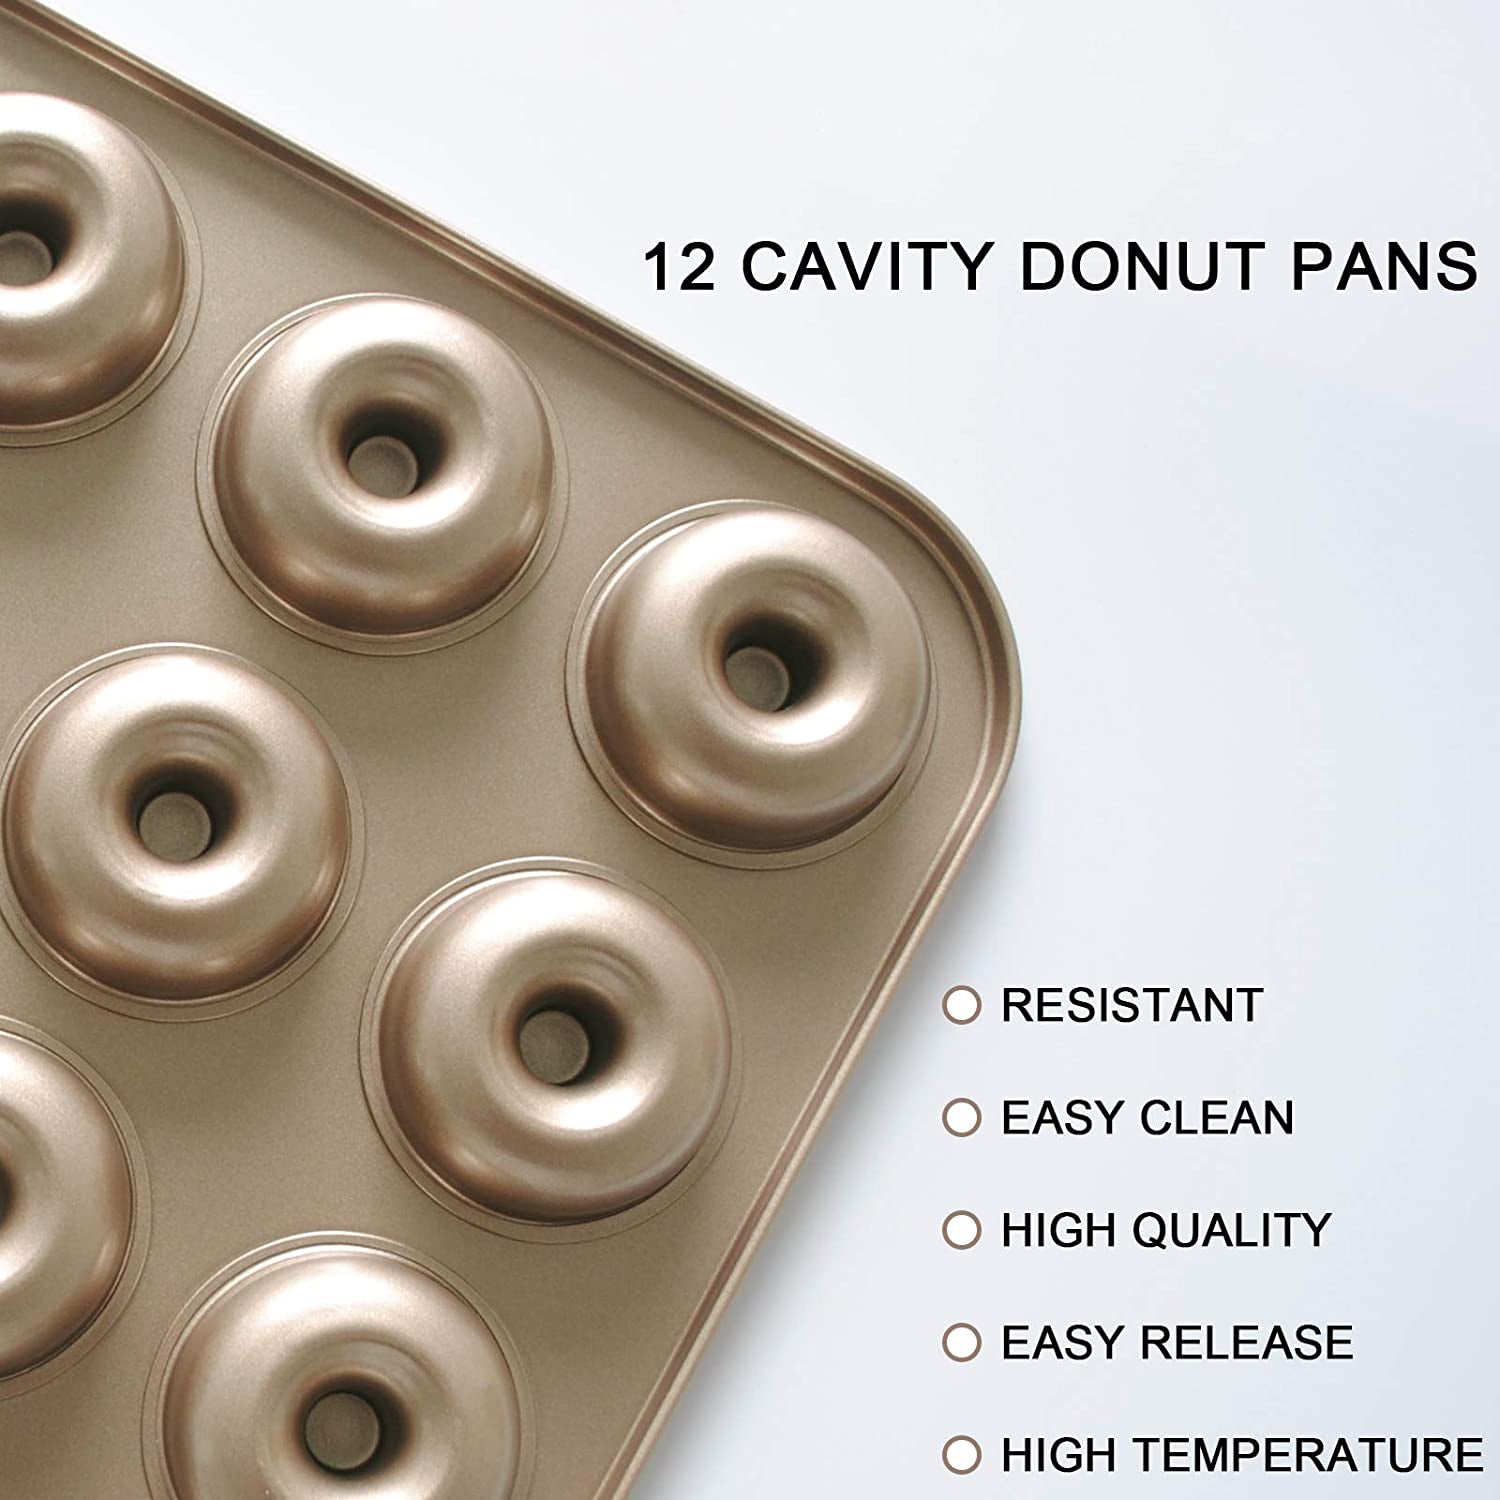 CHEFMADE Donut Mold Cake Pan, 12-Cavity Non-Stick Pattern Doughnut Bakeware for Oven Baking (Champagne Gold)